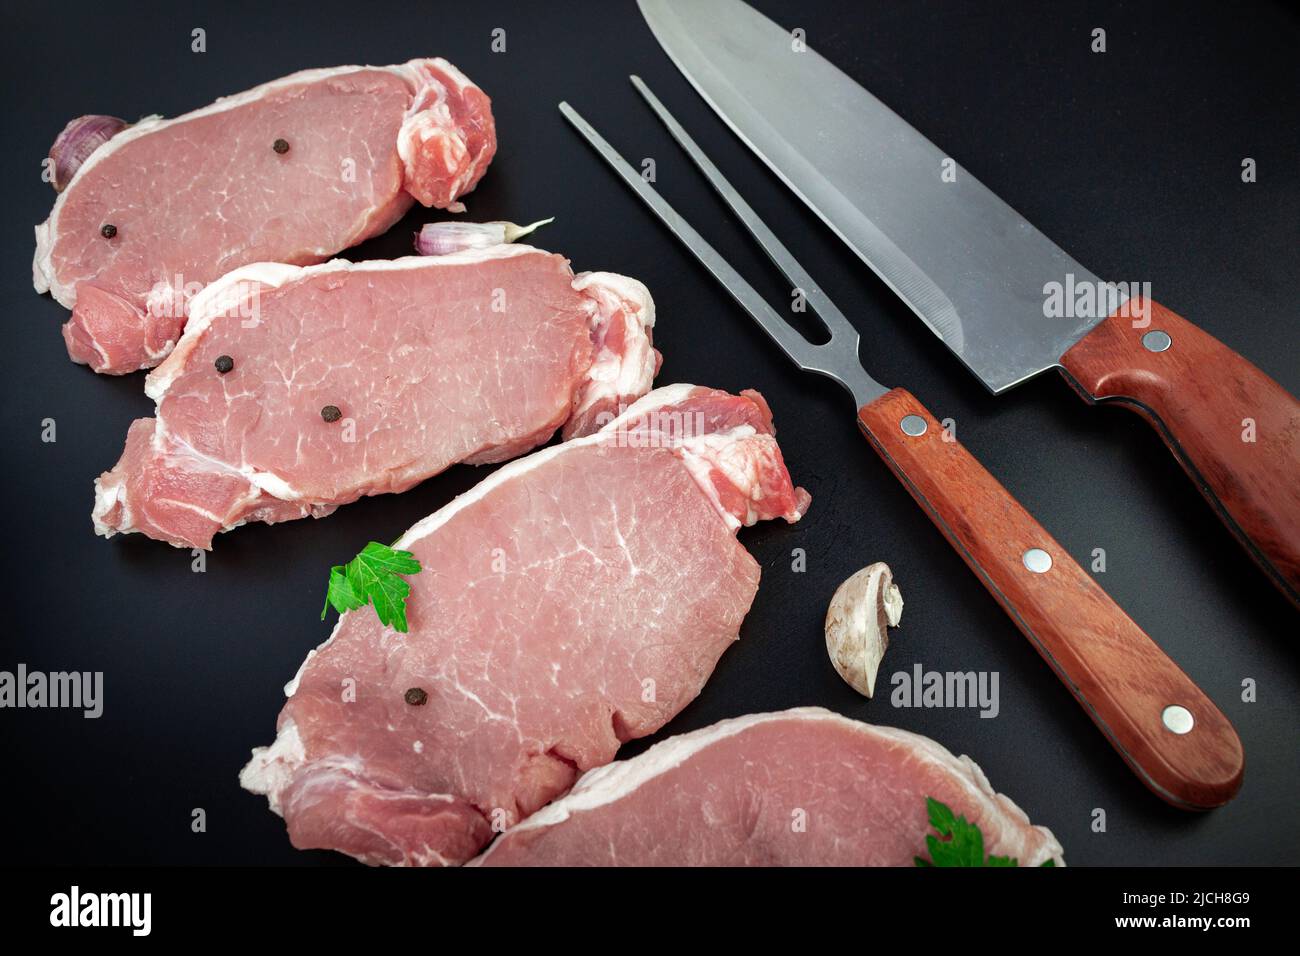 Raw veal meat fillet for grilling with seasoning and utensils, Tenderloin fillet mignon with meat knife and ingredients for cooking on dark background Stock Photo